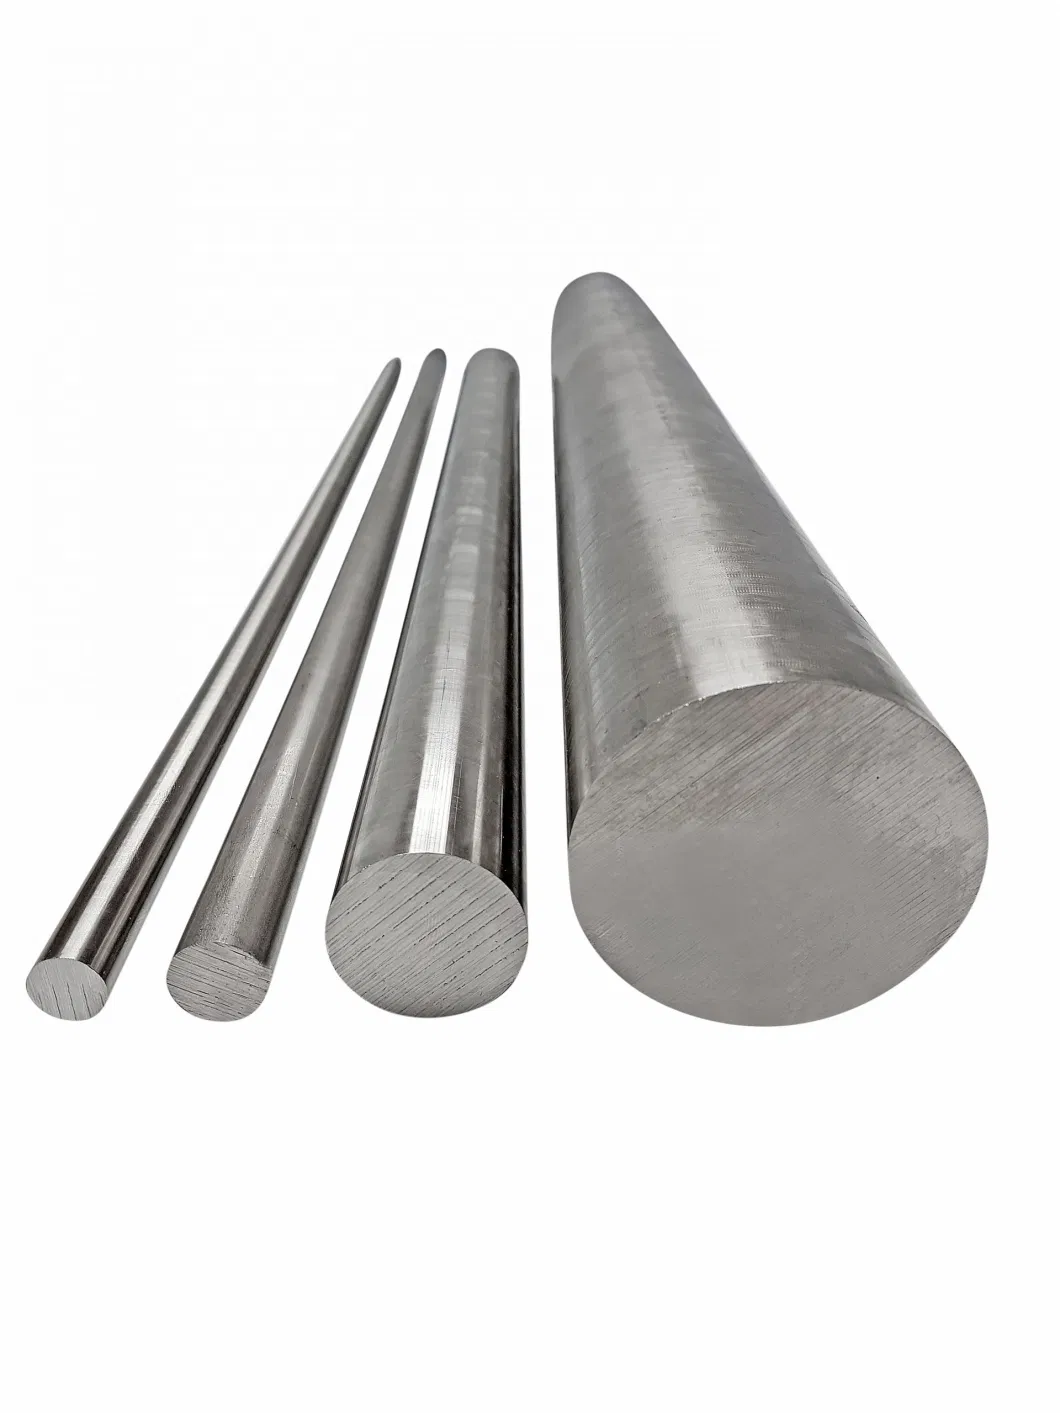 China Manufacturer ASTM Ss 316L 304 310 316 321 Stainless Steel Round Bar 2mm 3mm 6mm 10mm 12mm Metal Rod